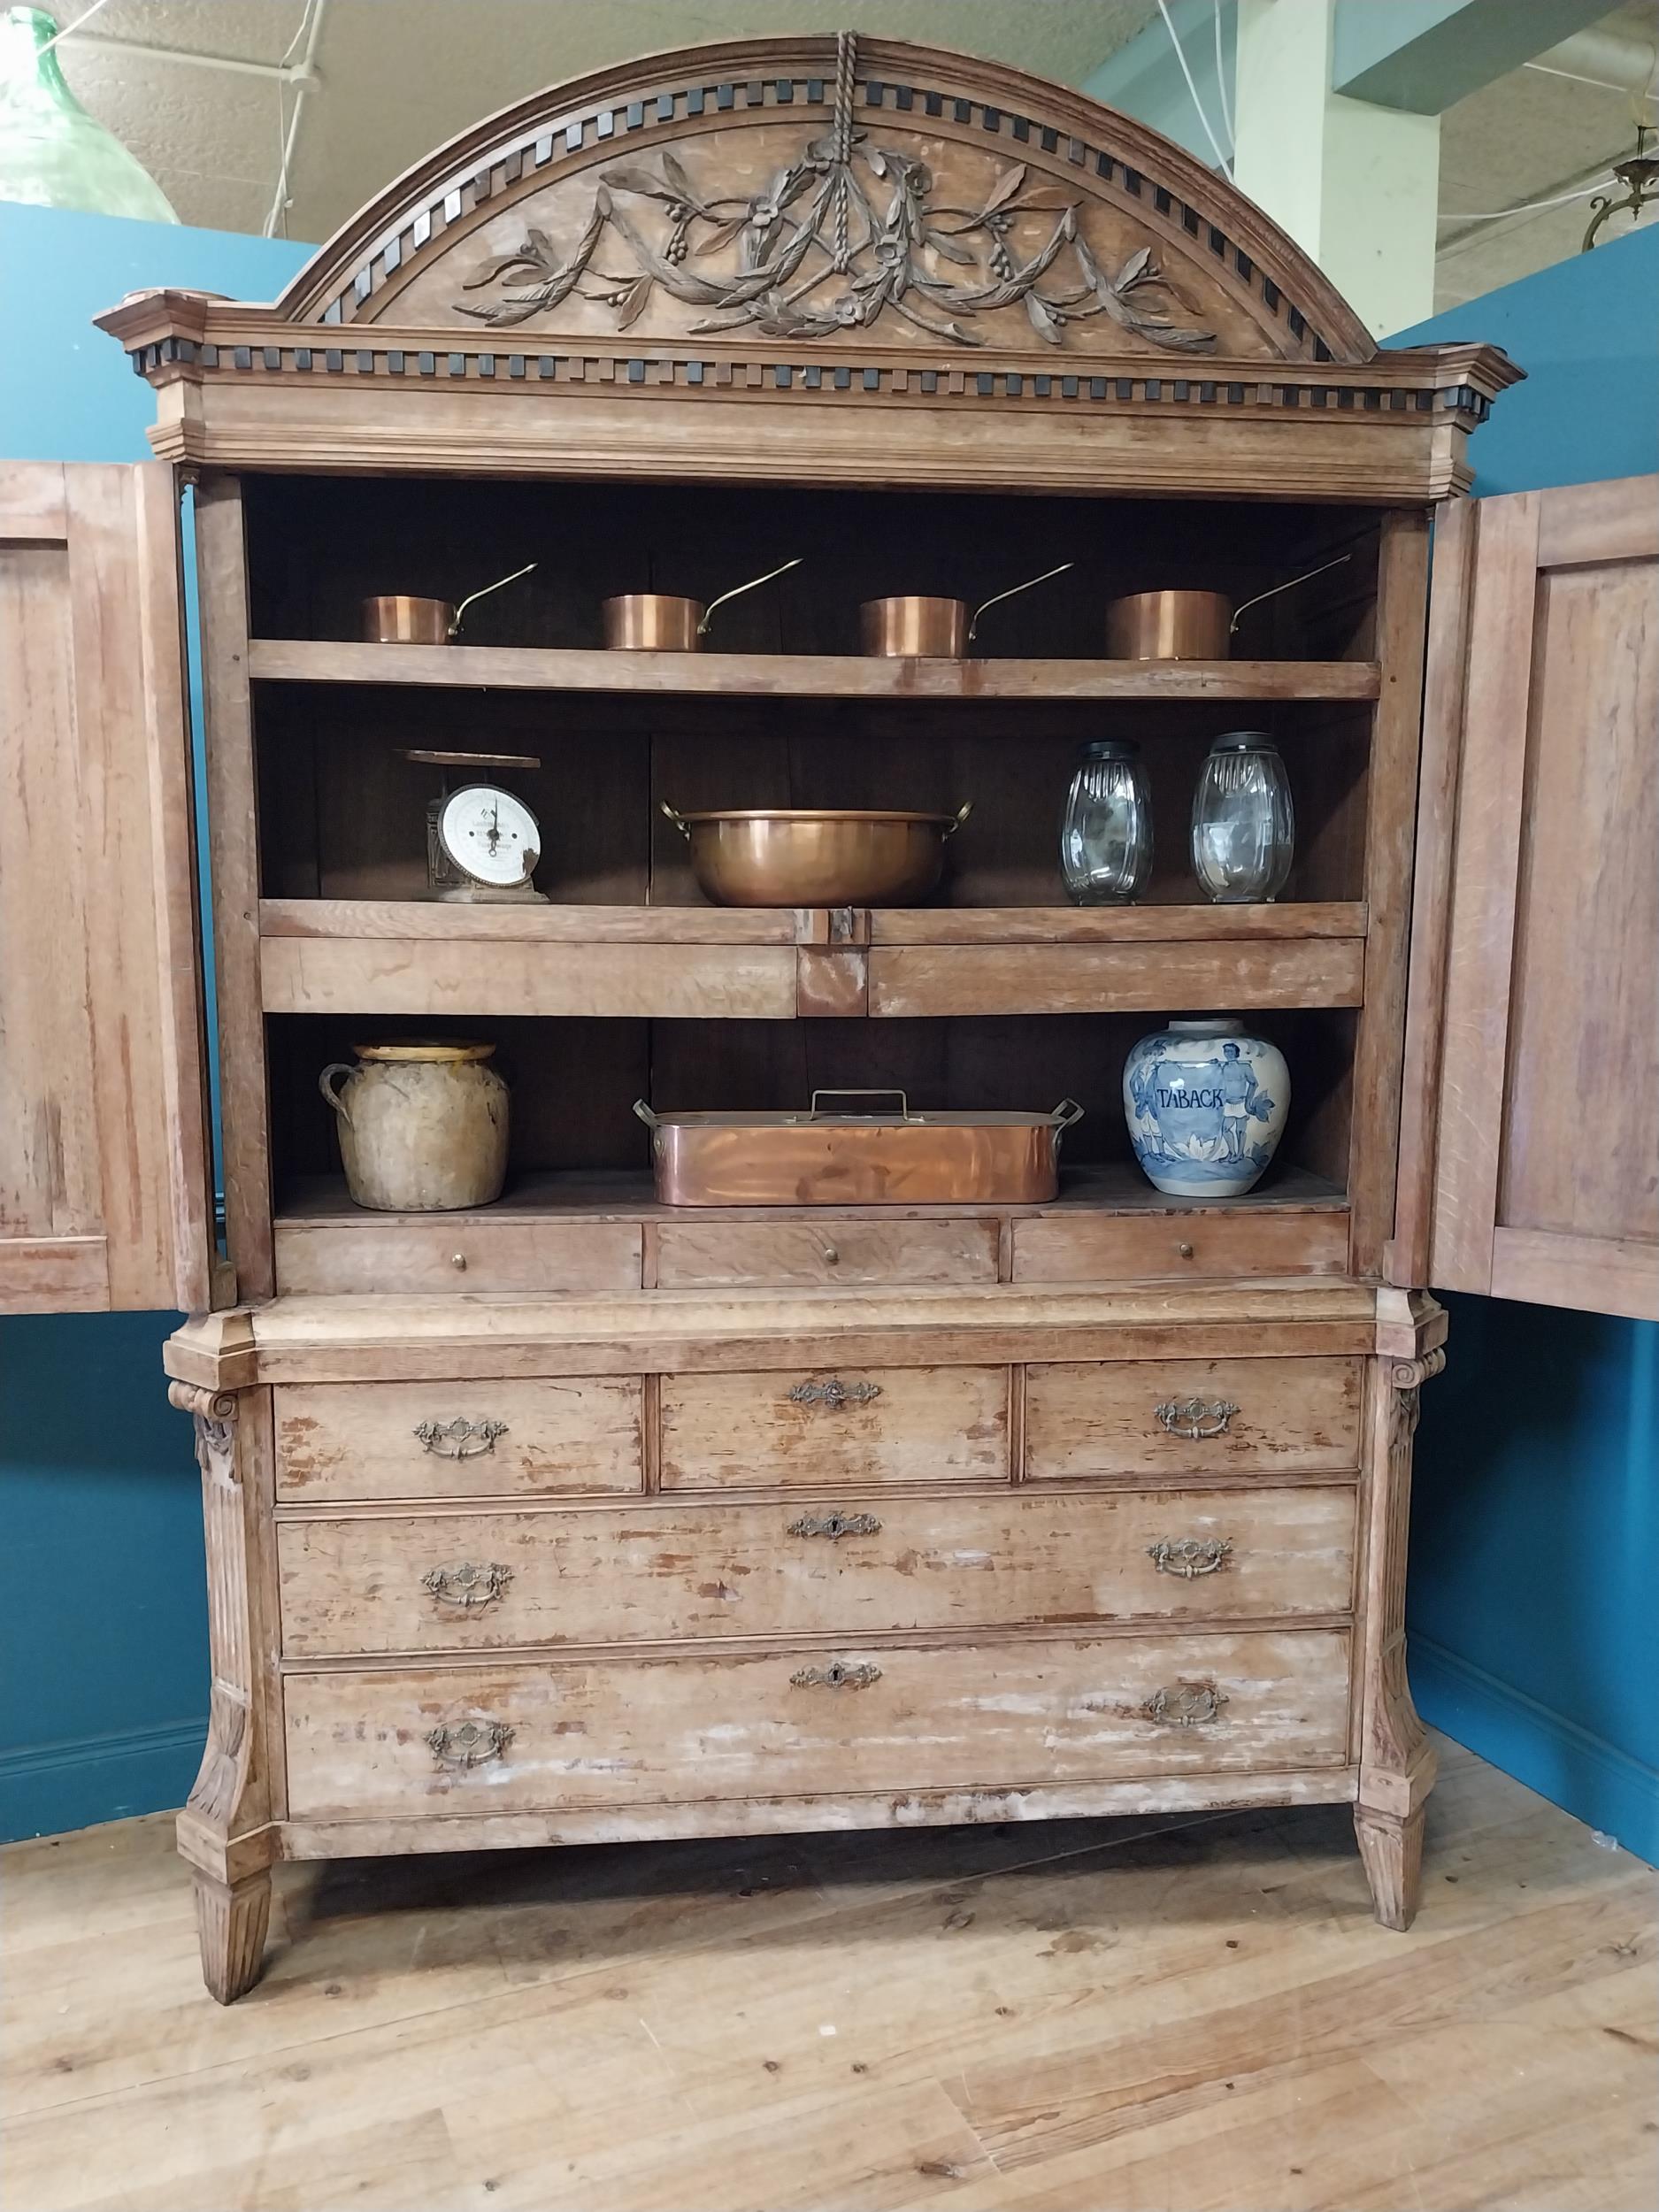 Early 19th C. French oak pantry cupboard {250 cm H x 182 cm W x 60 cm D}. - Image 3 of 10